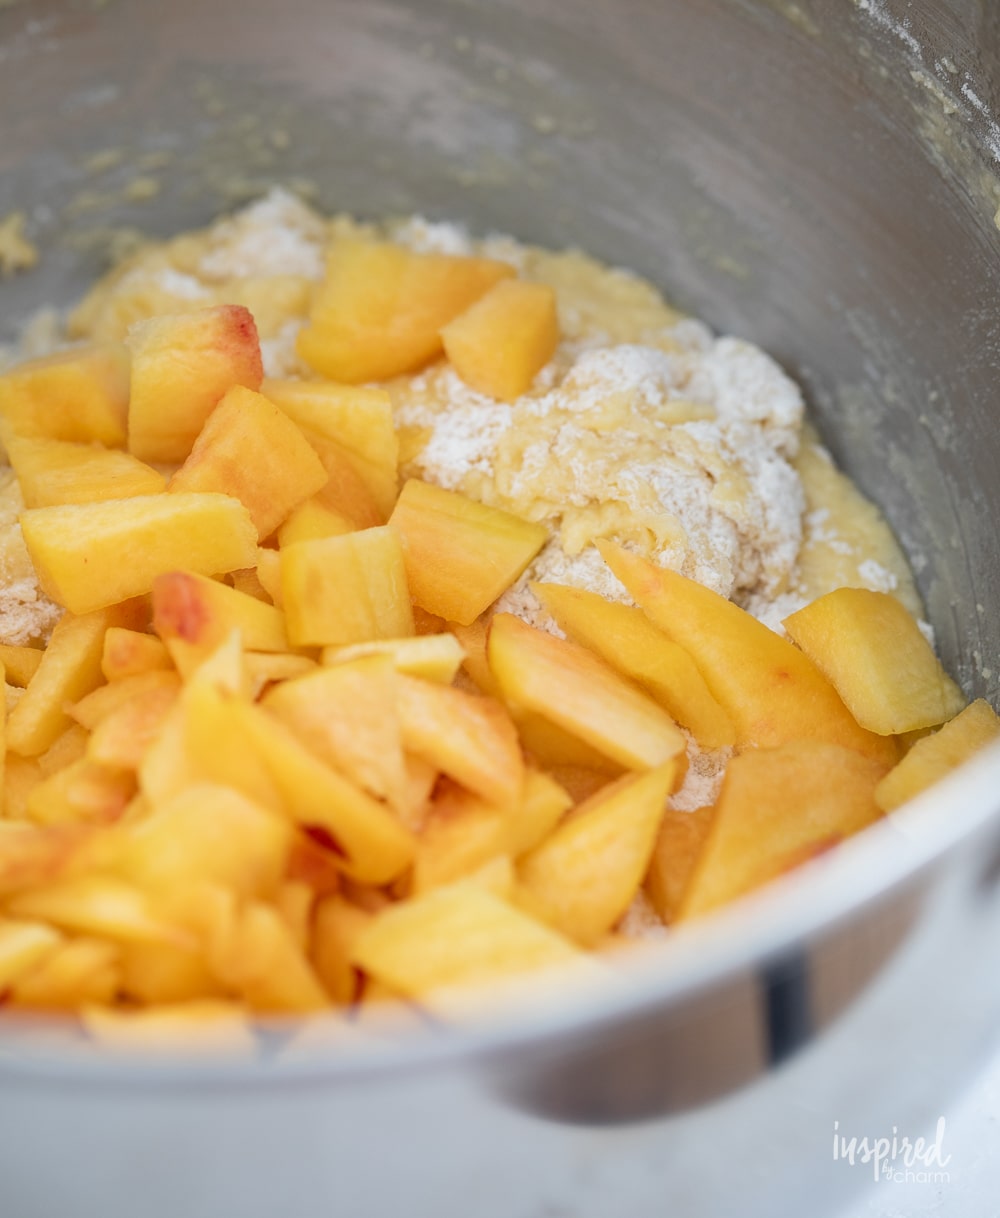 peach cobbler ingredients in a bowl.